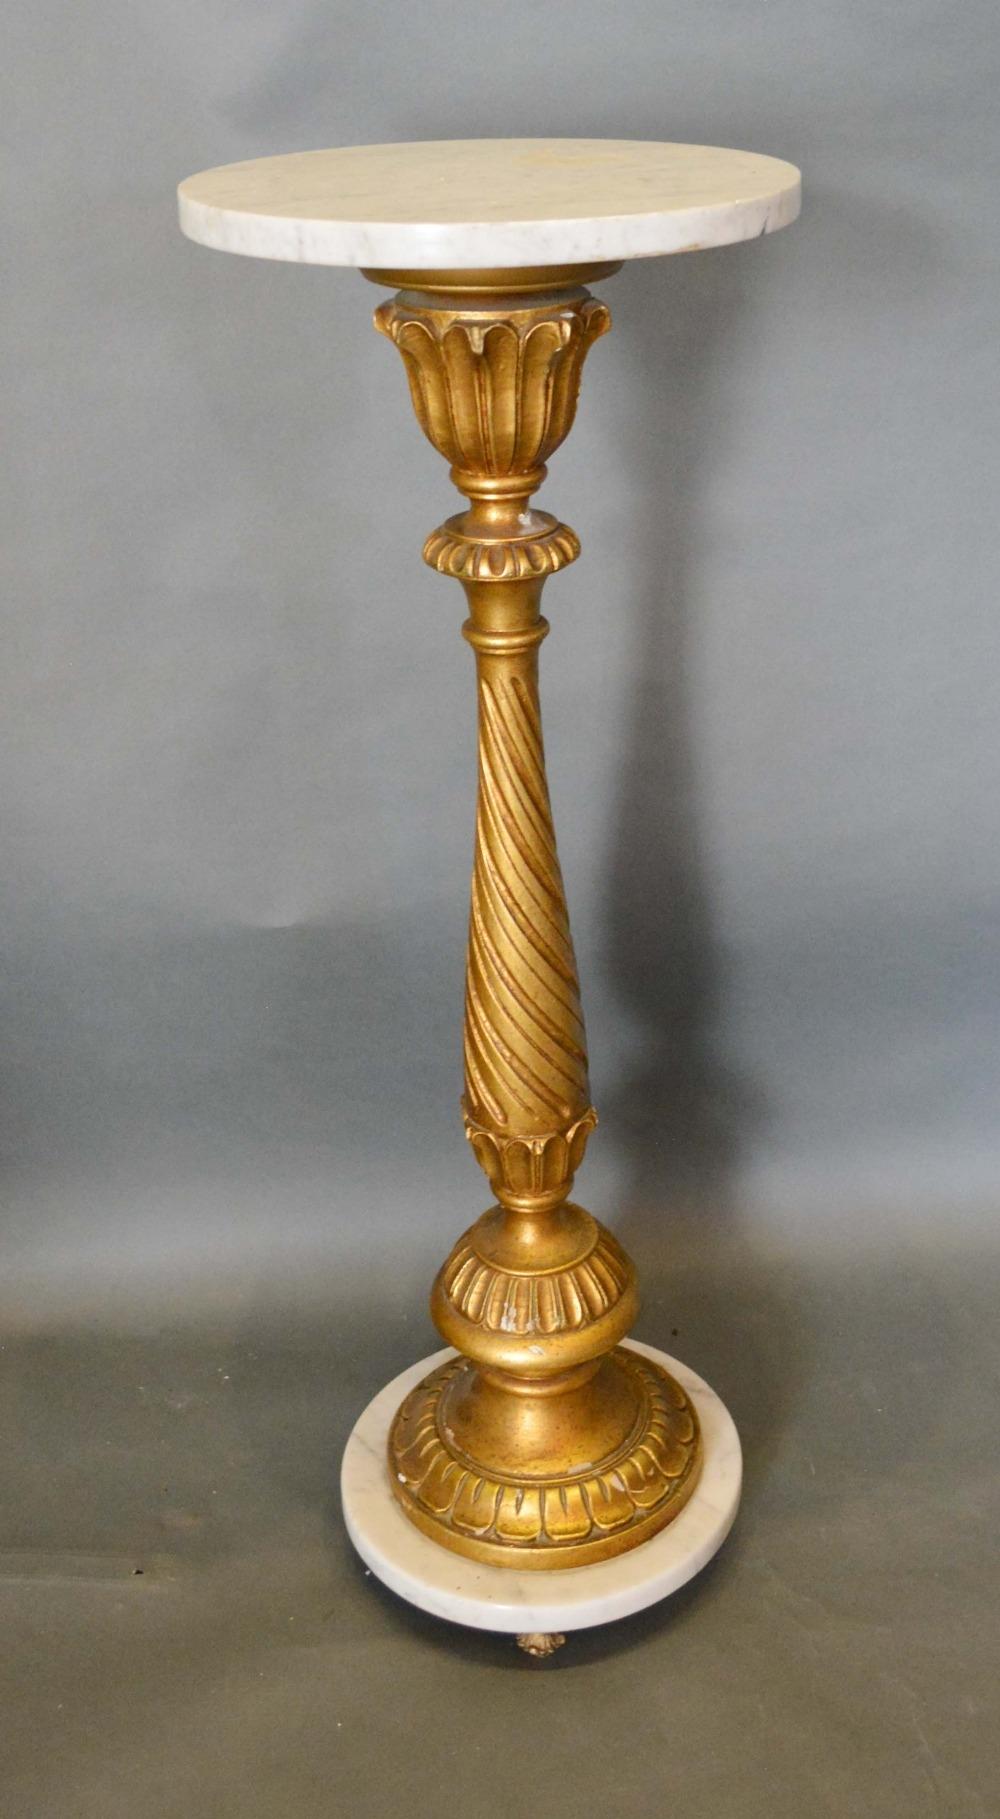 A French Carved Giltwood and Variegated Marble Torchere with a spiral twist column and circular